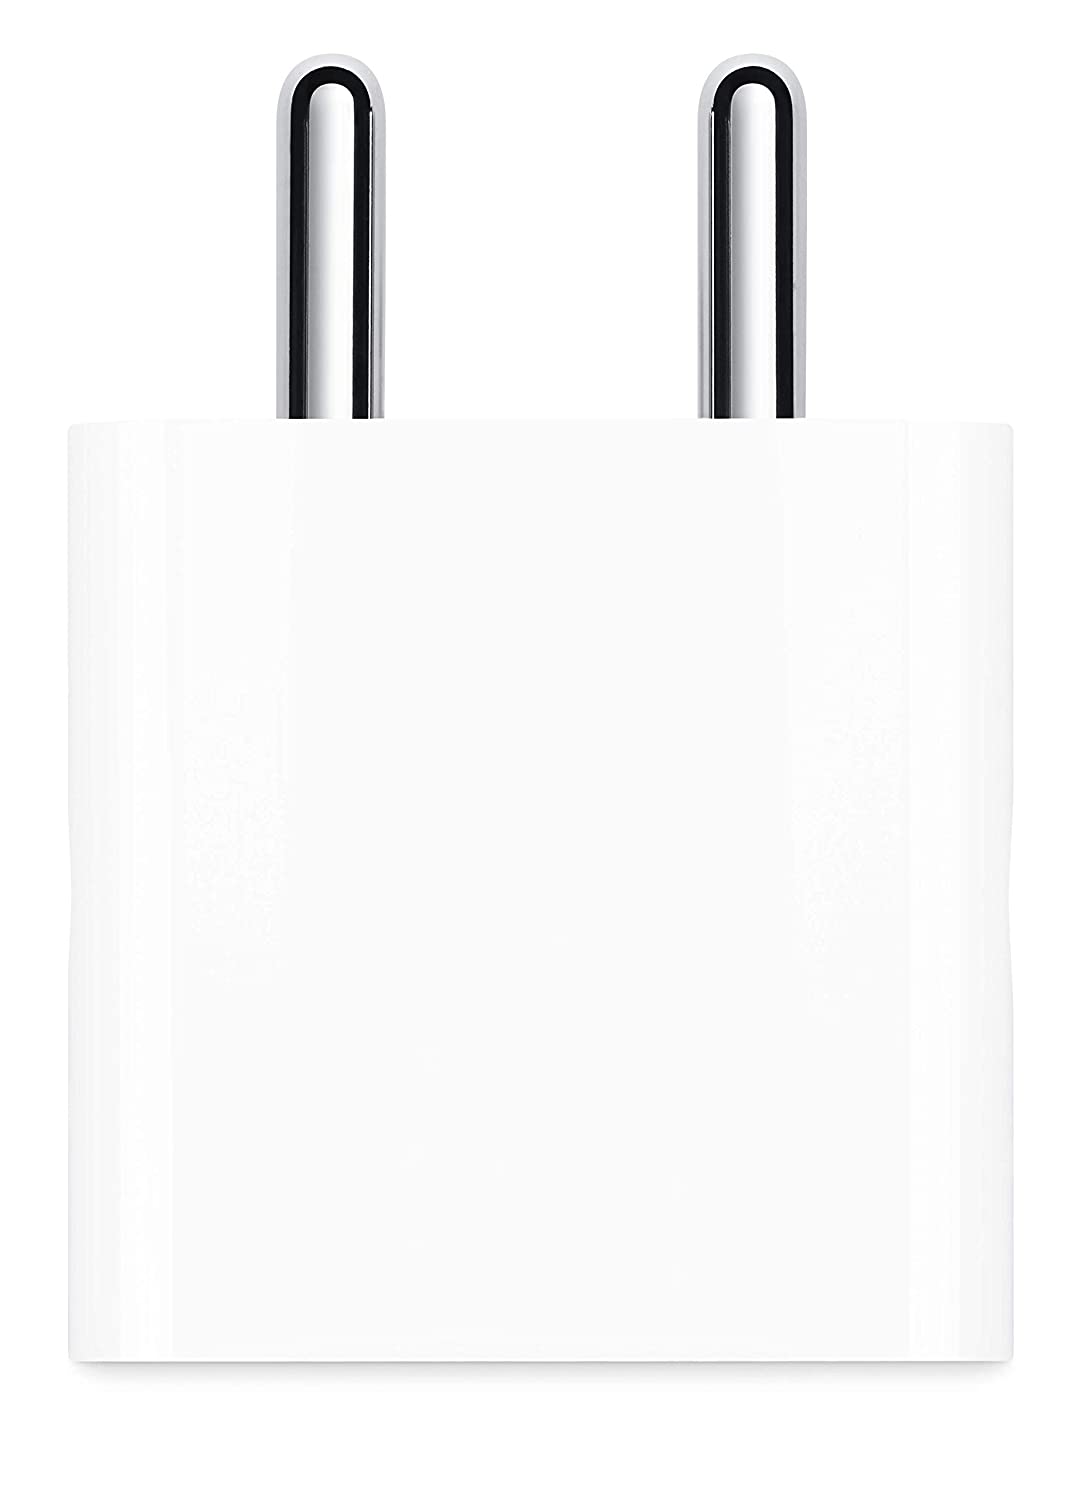 Apple 20W USB-C Power Adapter (for iPhone, iPad & AirPods) (Refurbished)